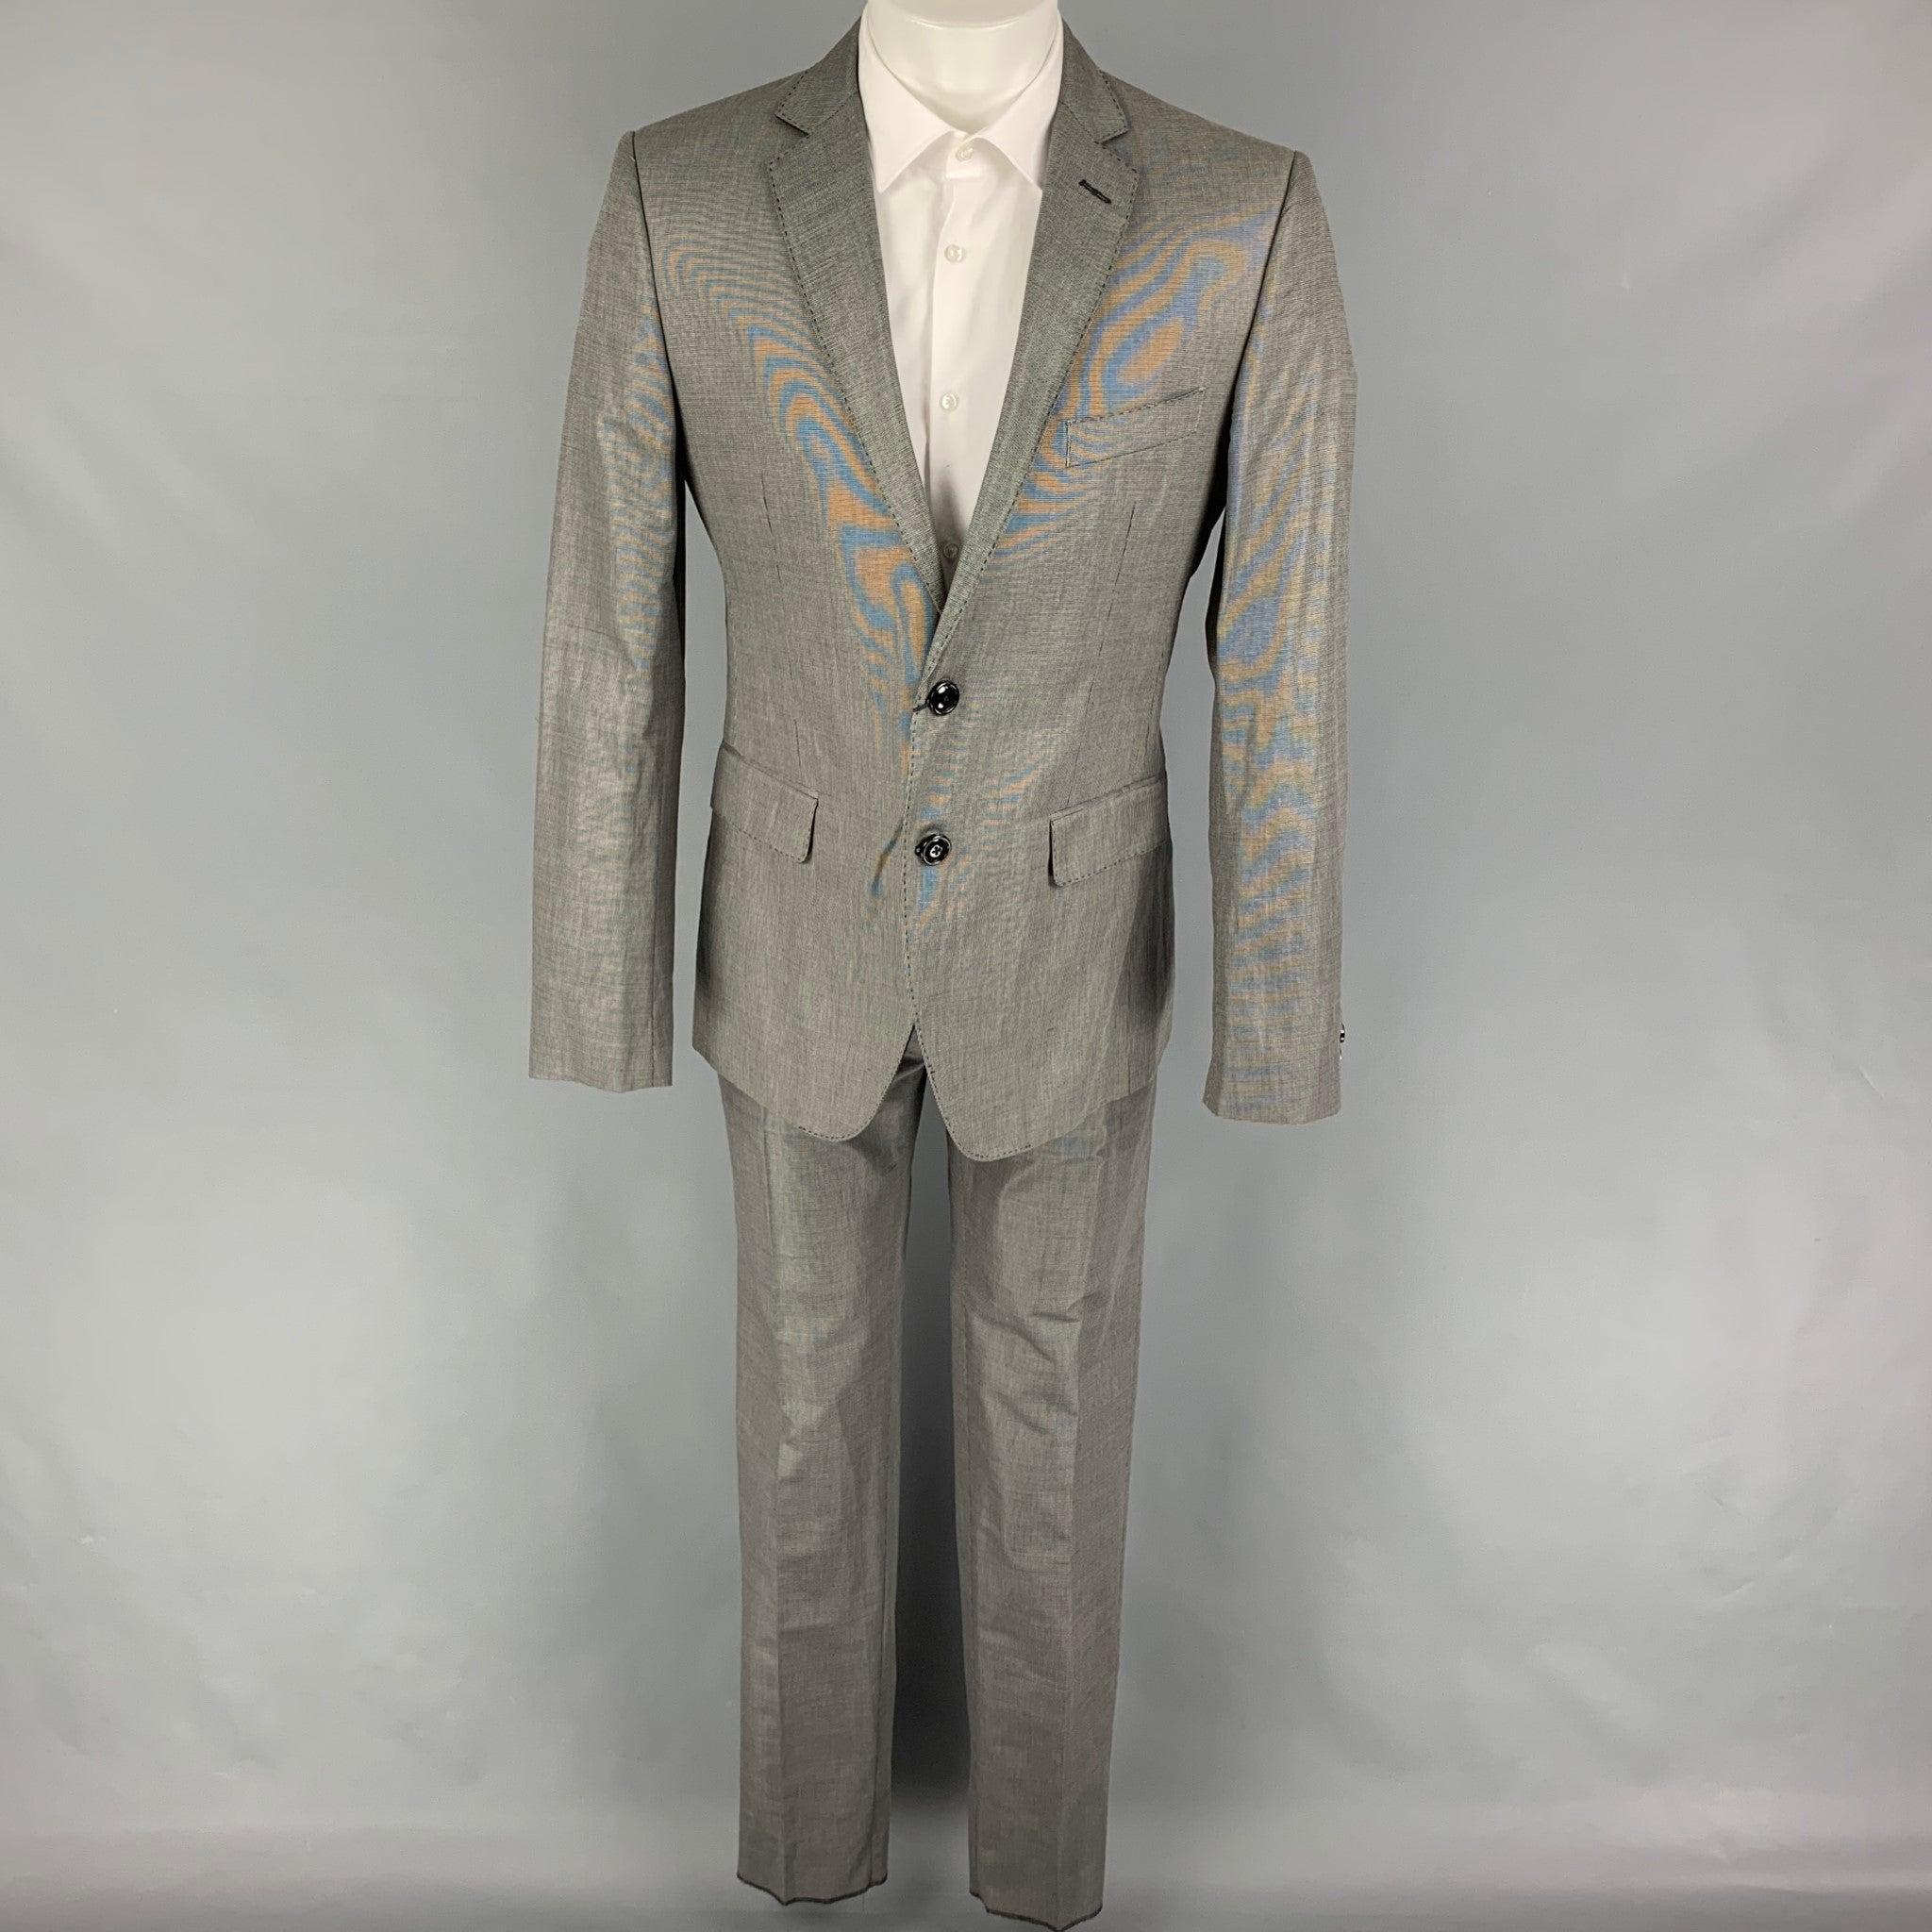 LOVE MOSCHINO
suit comes in a black & grey nailhead cotton blend with a full liner and includes a single breasted, double button sport coat with a lapel and matching flat front trousers. Made in Romania. New with tags. 

Marked:   D 50 / GB 40 / F